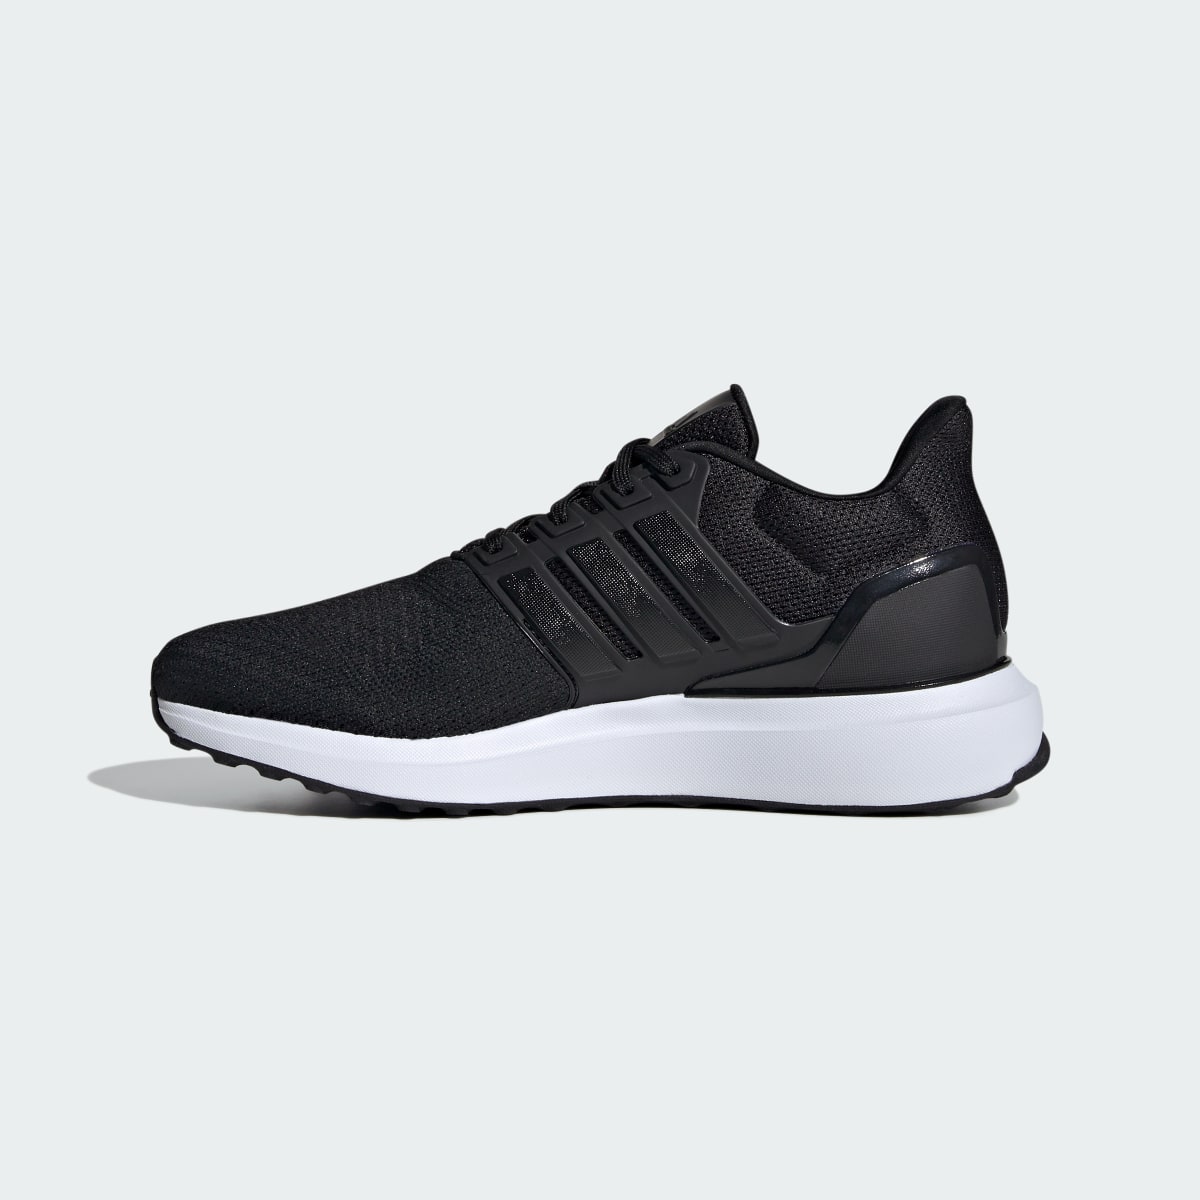 Adidas UBounce DNA Shoes. 7